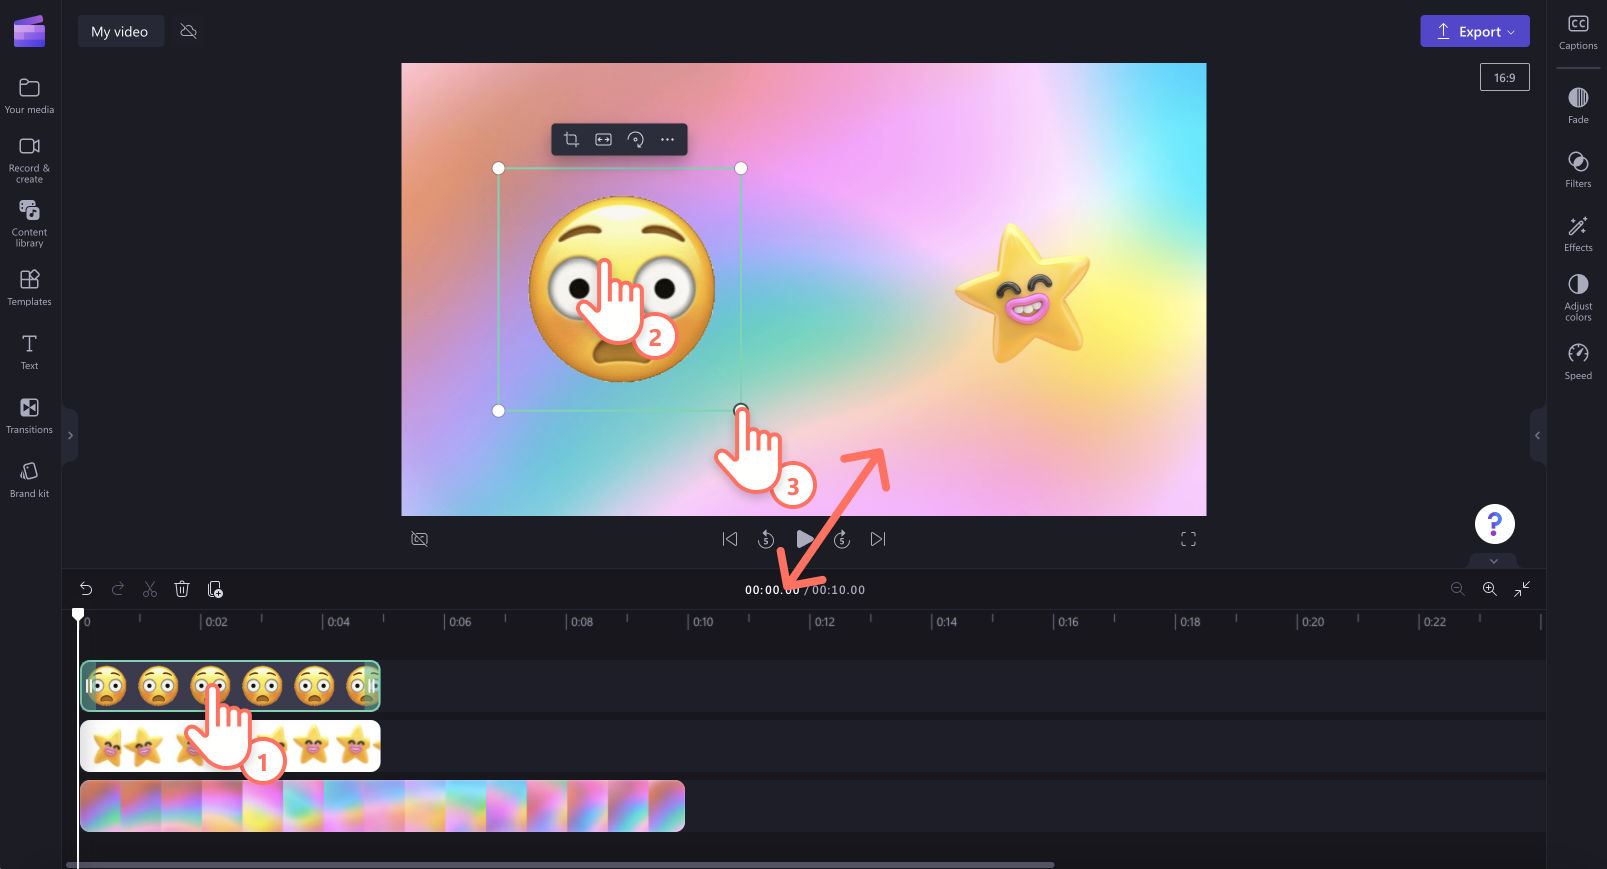 An image of a user moving and resizing an emoji on the video preview.